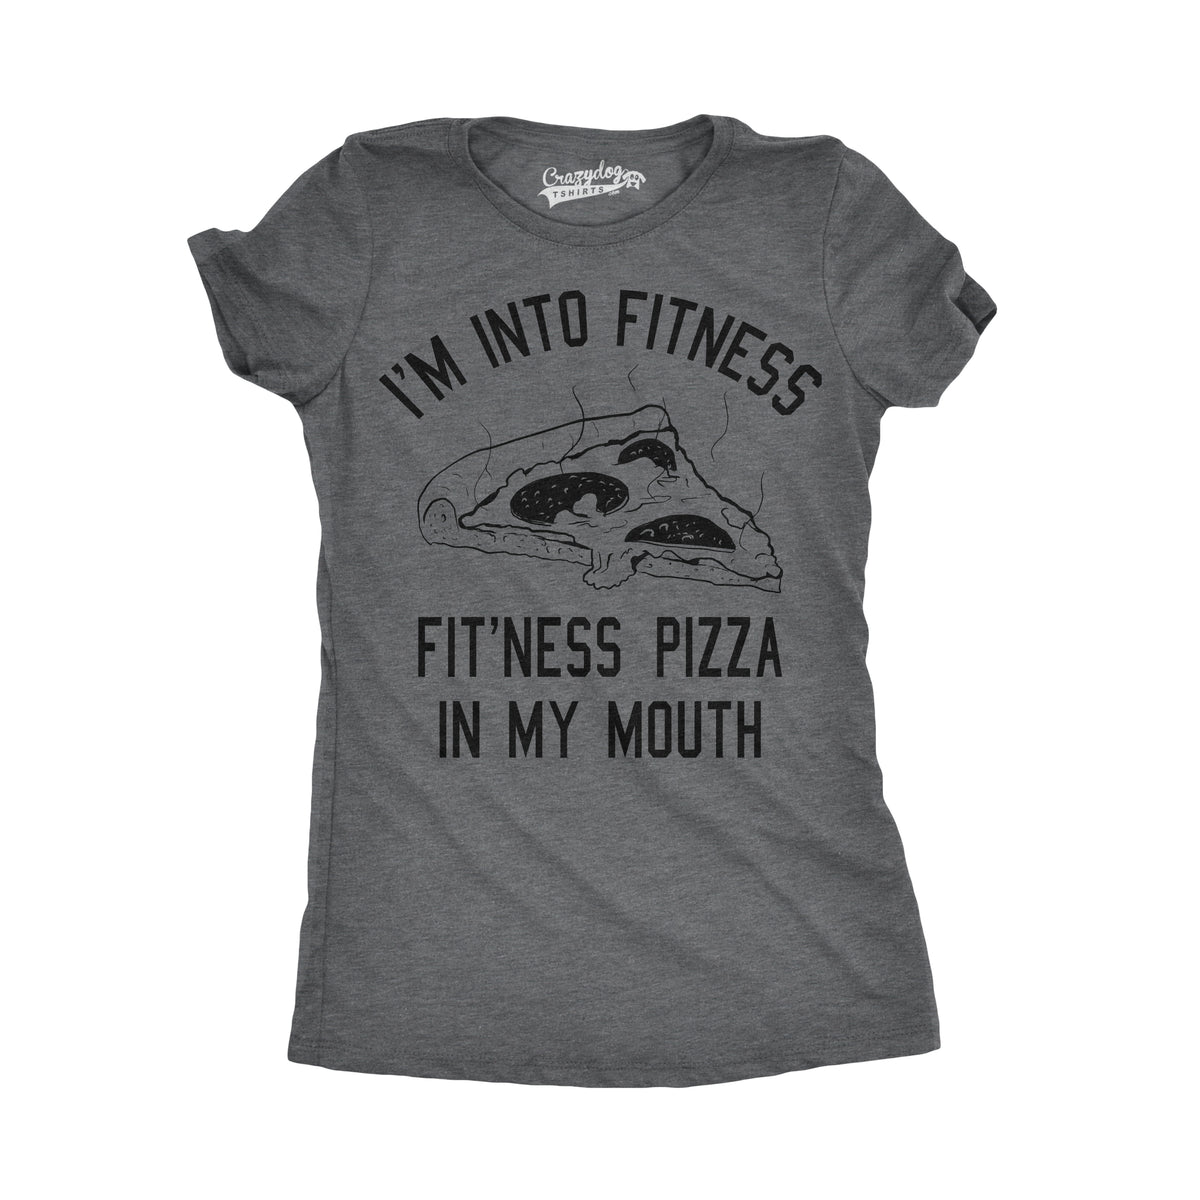 Funny Dark Heather Grey Fitness Pizza In My Mouth Womens T Shirt Nerdy Fitness Food Tee